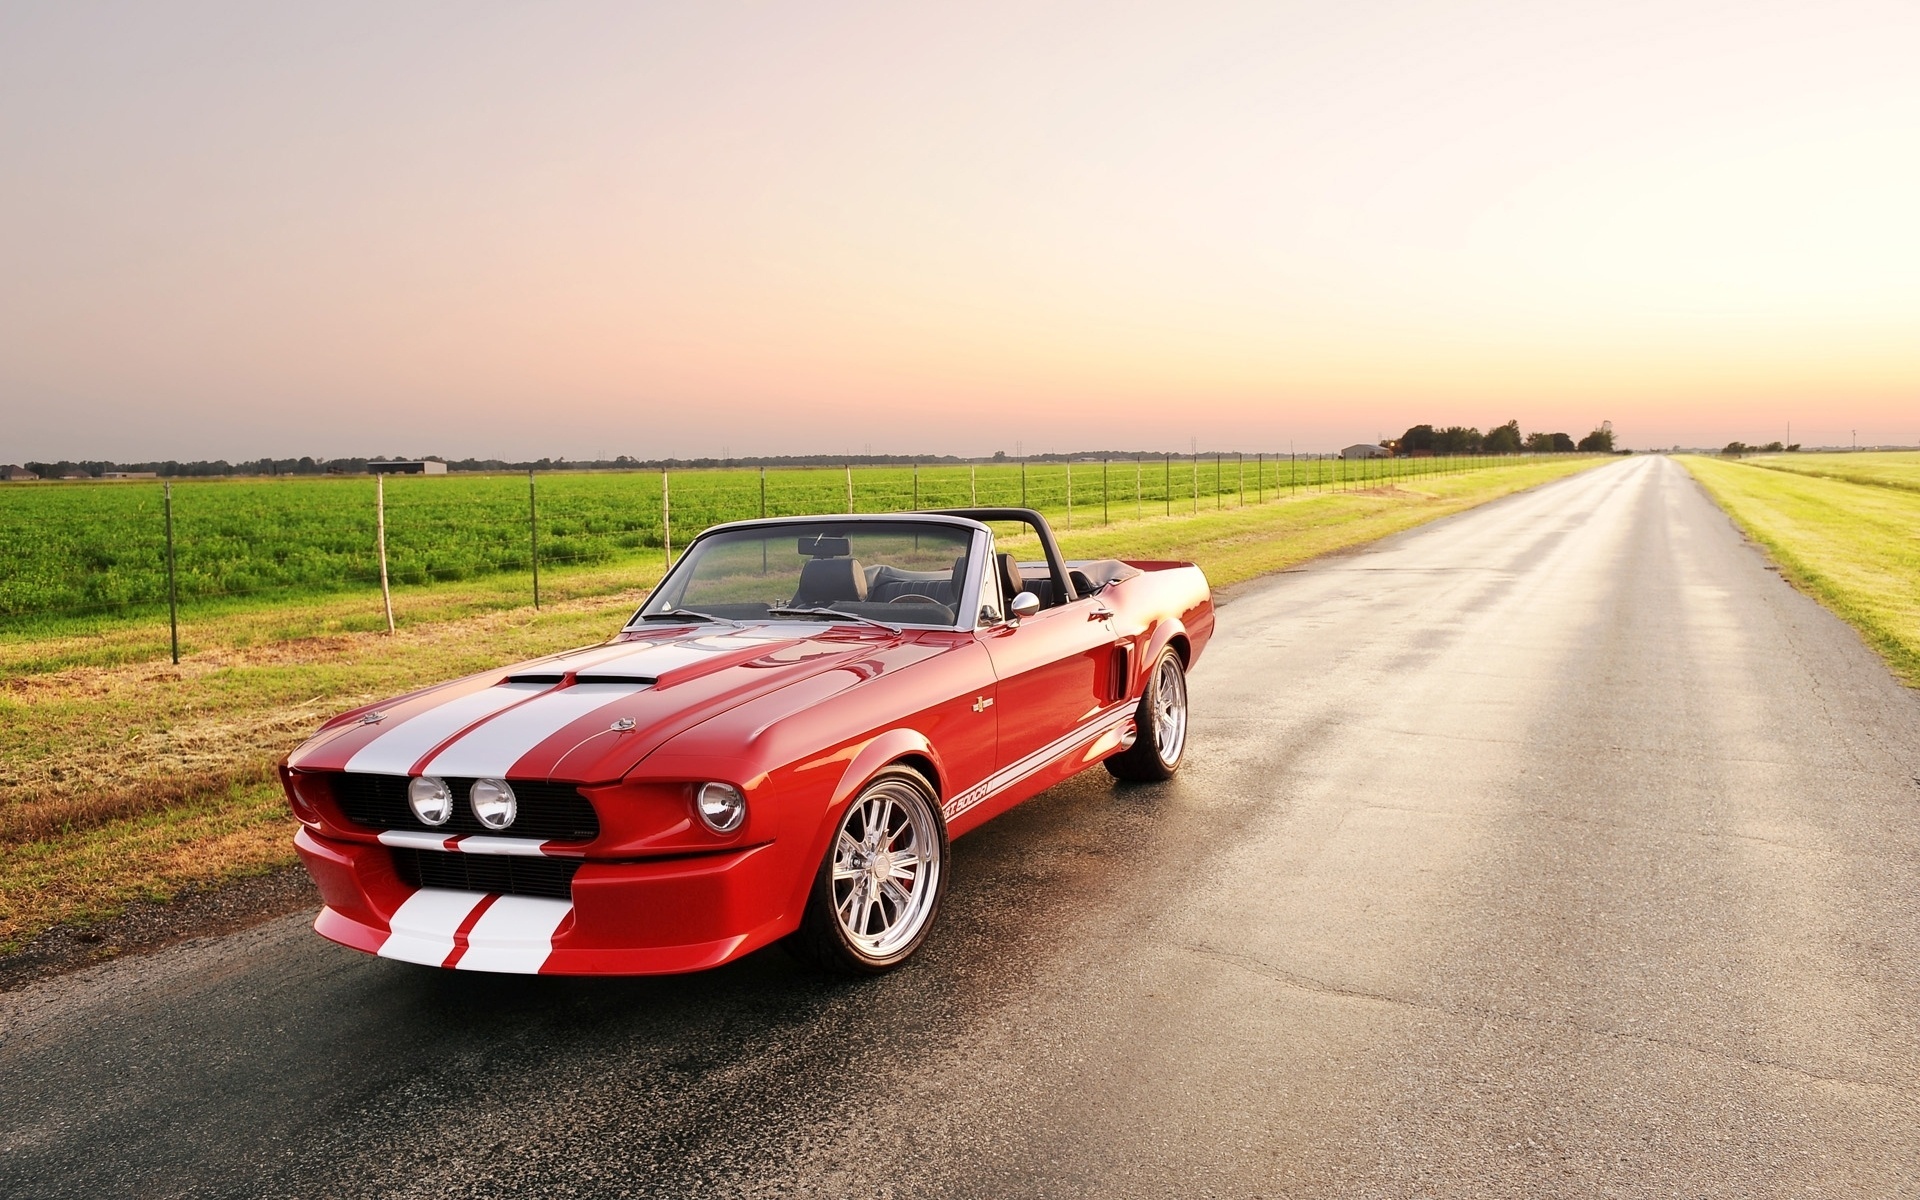 Classic Ford Mustang Shelby 500cr HD Wallpaper